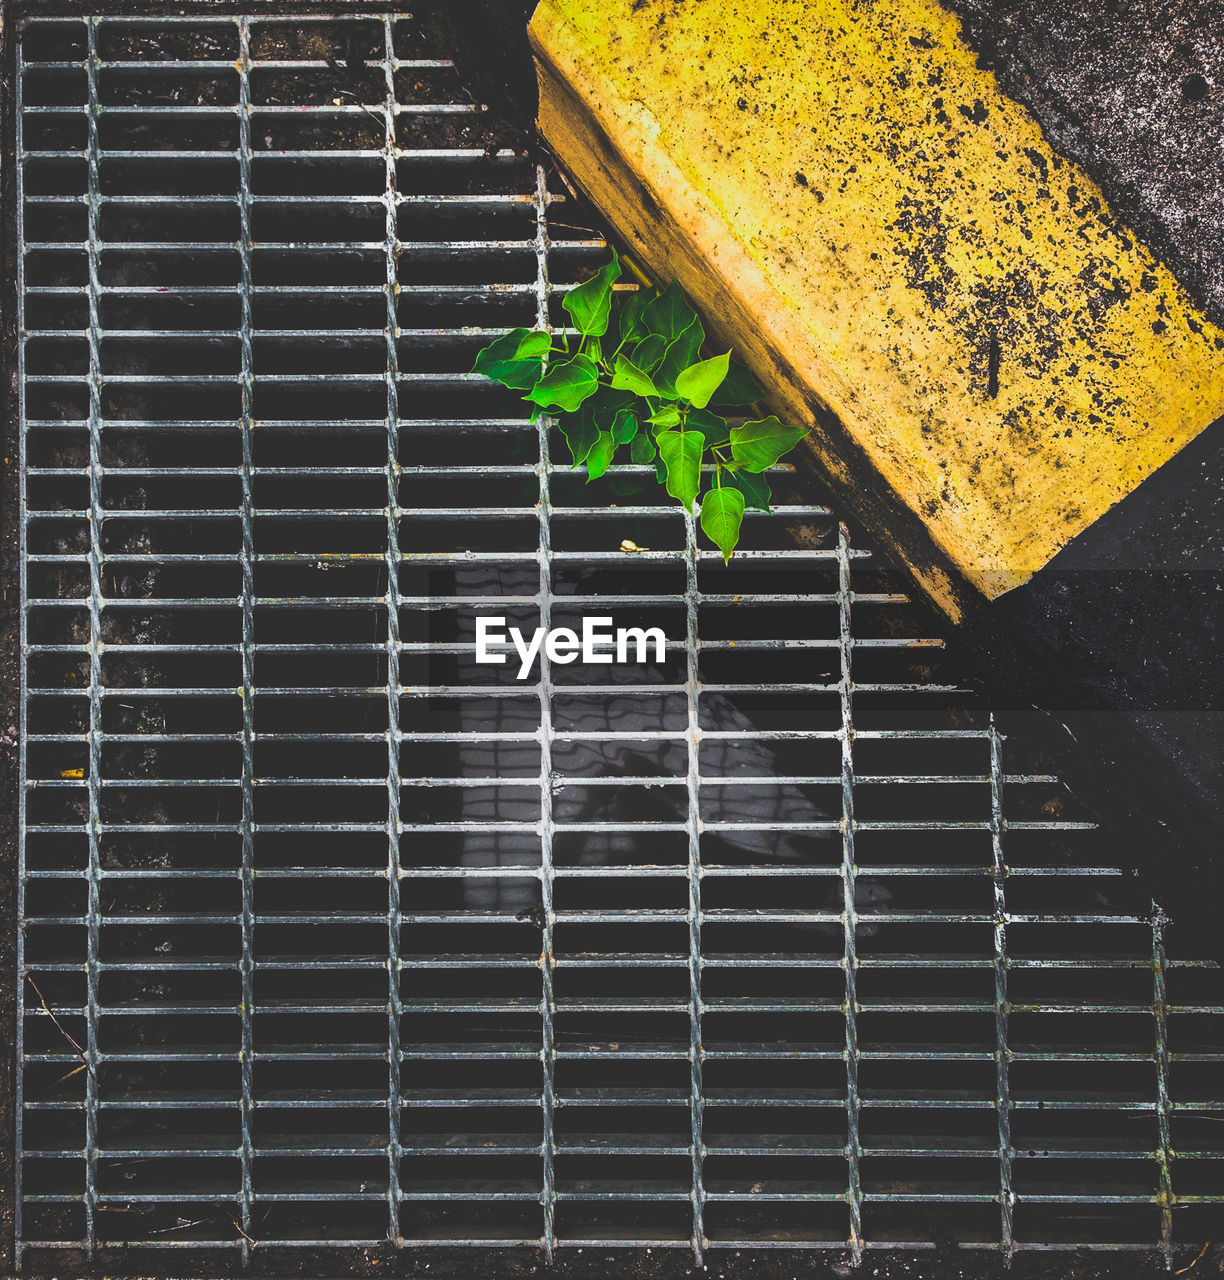 High angle view of plant growing amidst metal grate